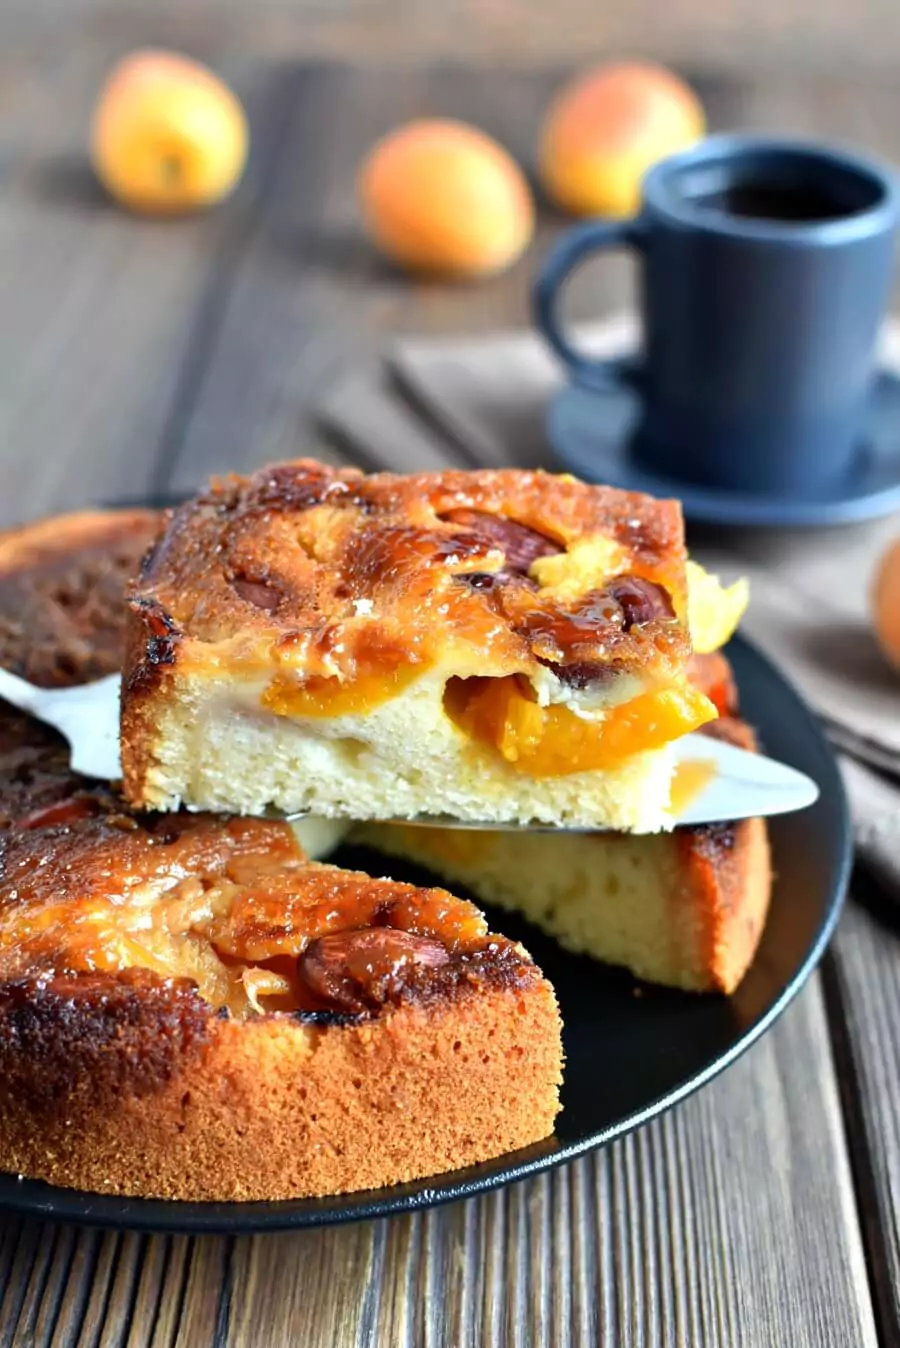 Apricot Crumble Cake with step-by-step photos | Eat, Little Bird